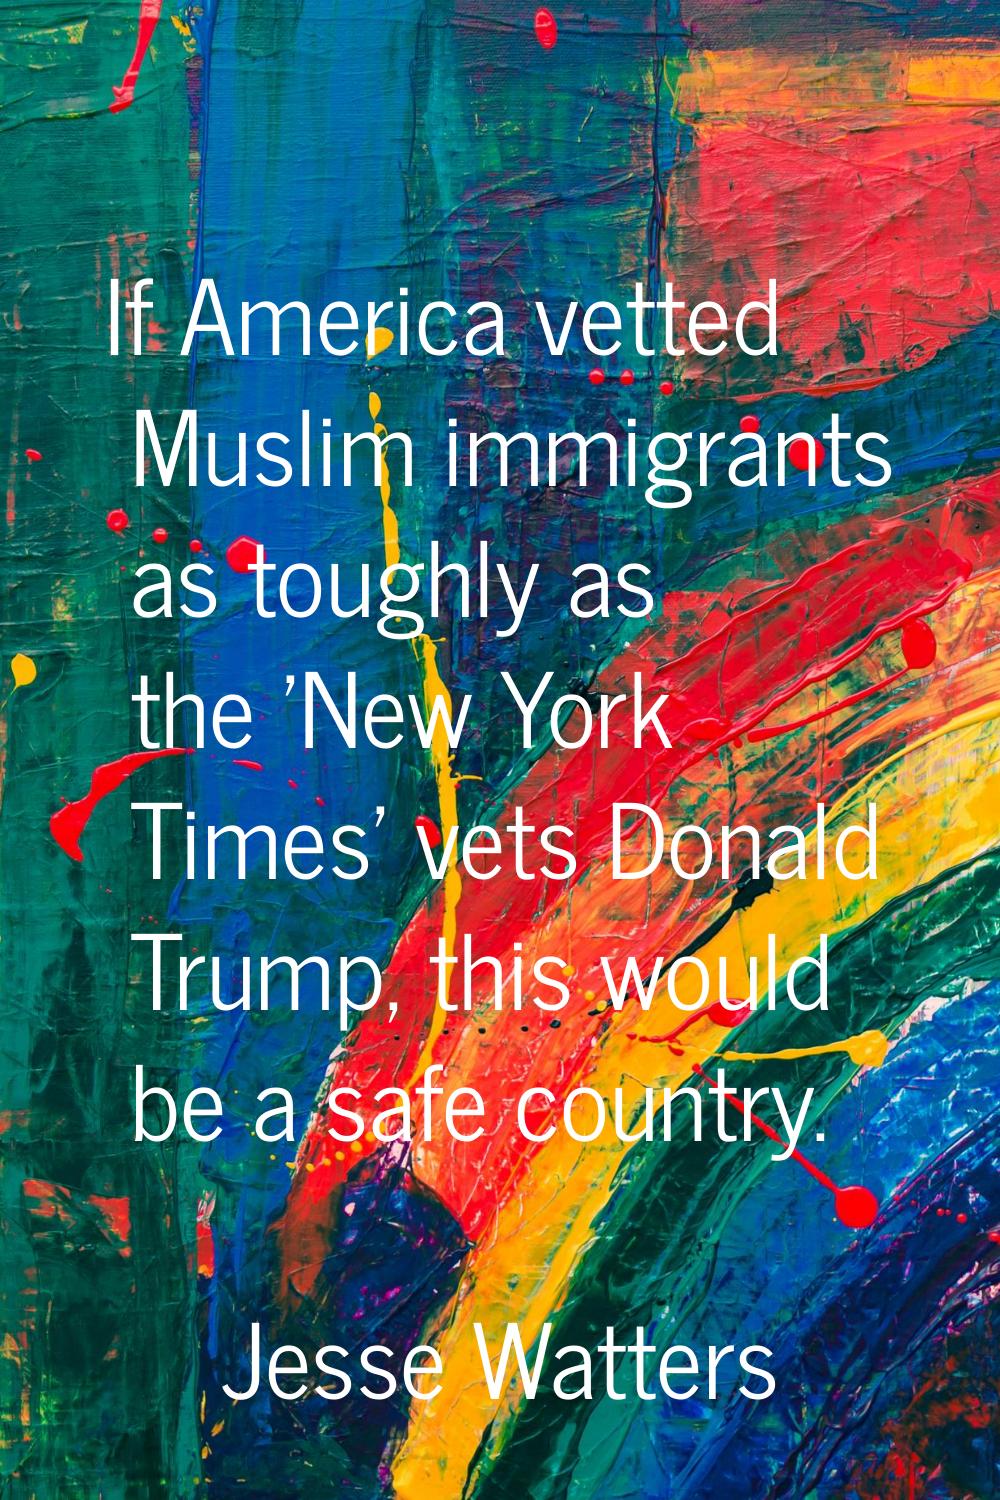 If America vetted Muslim immigrants as toughly as the 'New York Times' vets Donald Trump, this woul